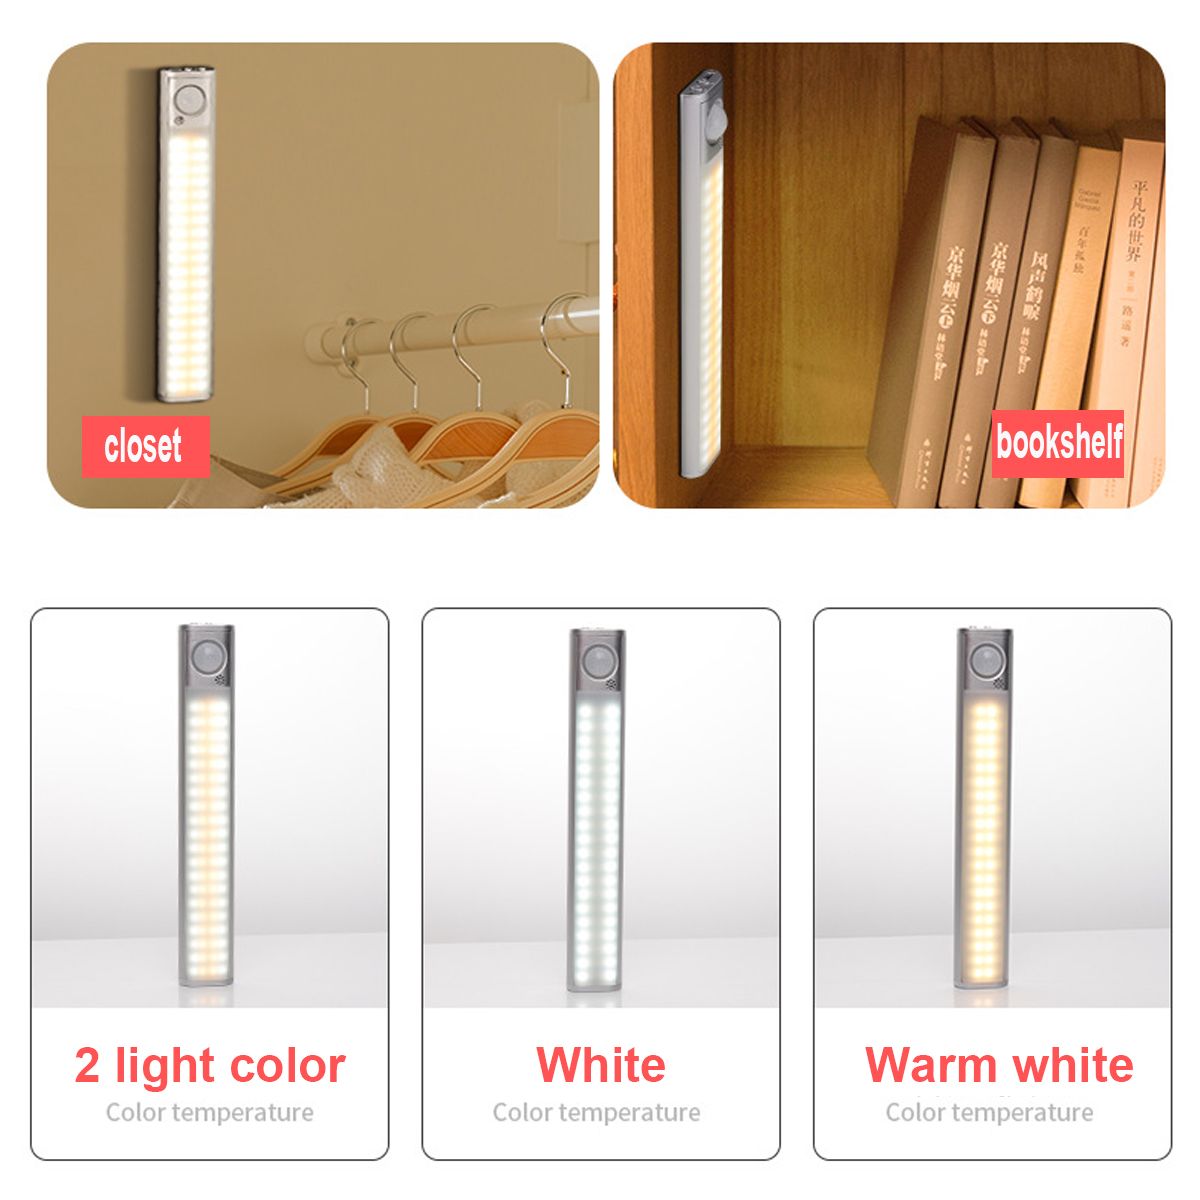 USB-Rechargeable-Wireless-PIR-Motion-Sensor-Night-Light-Color-Adjustable-Closet-Wall-Lamp-for-Indoor-1737106